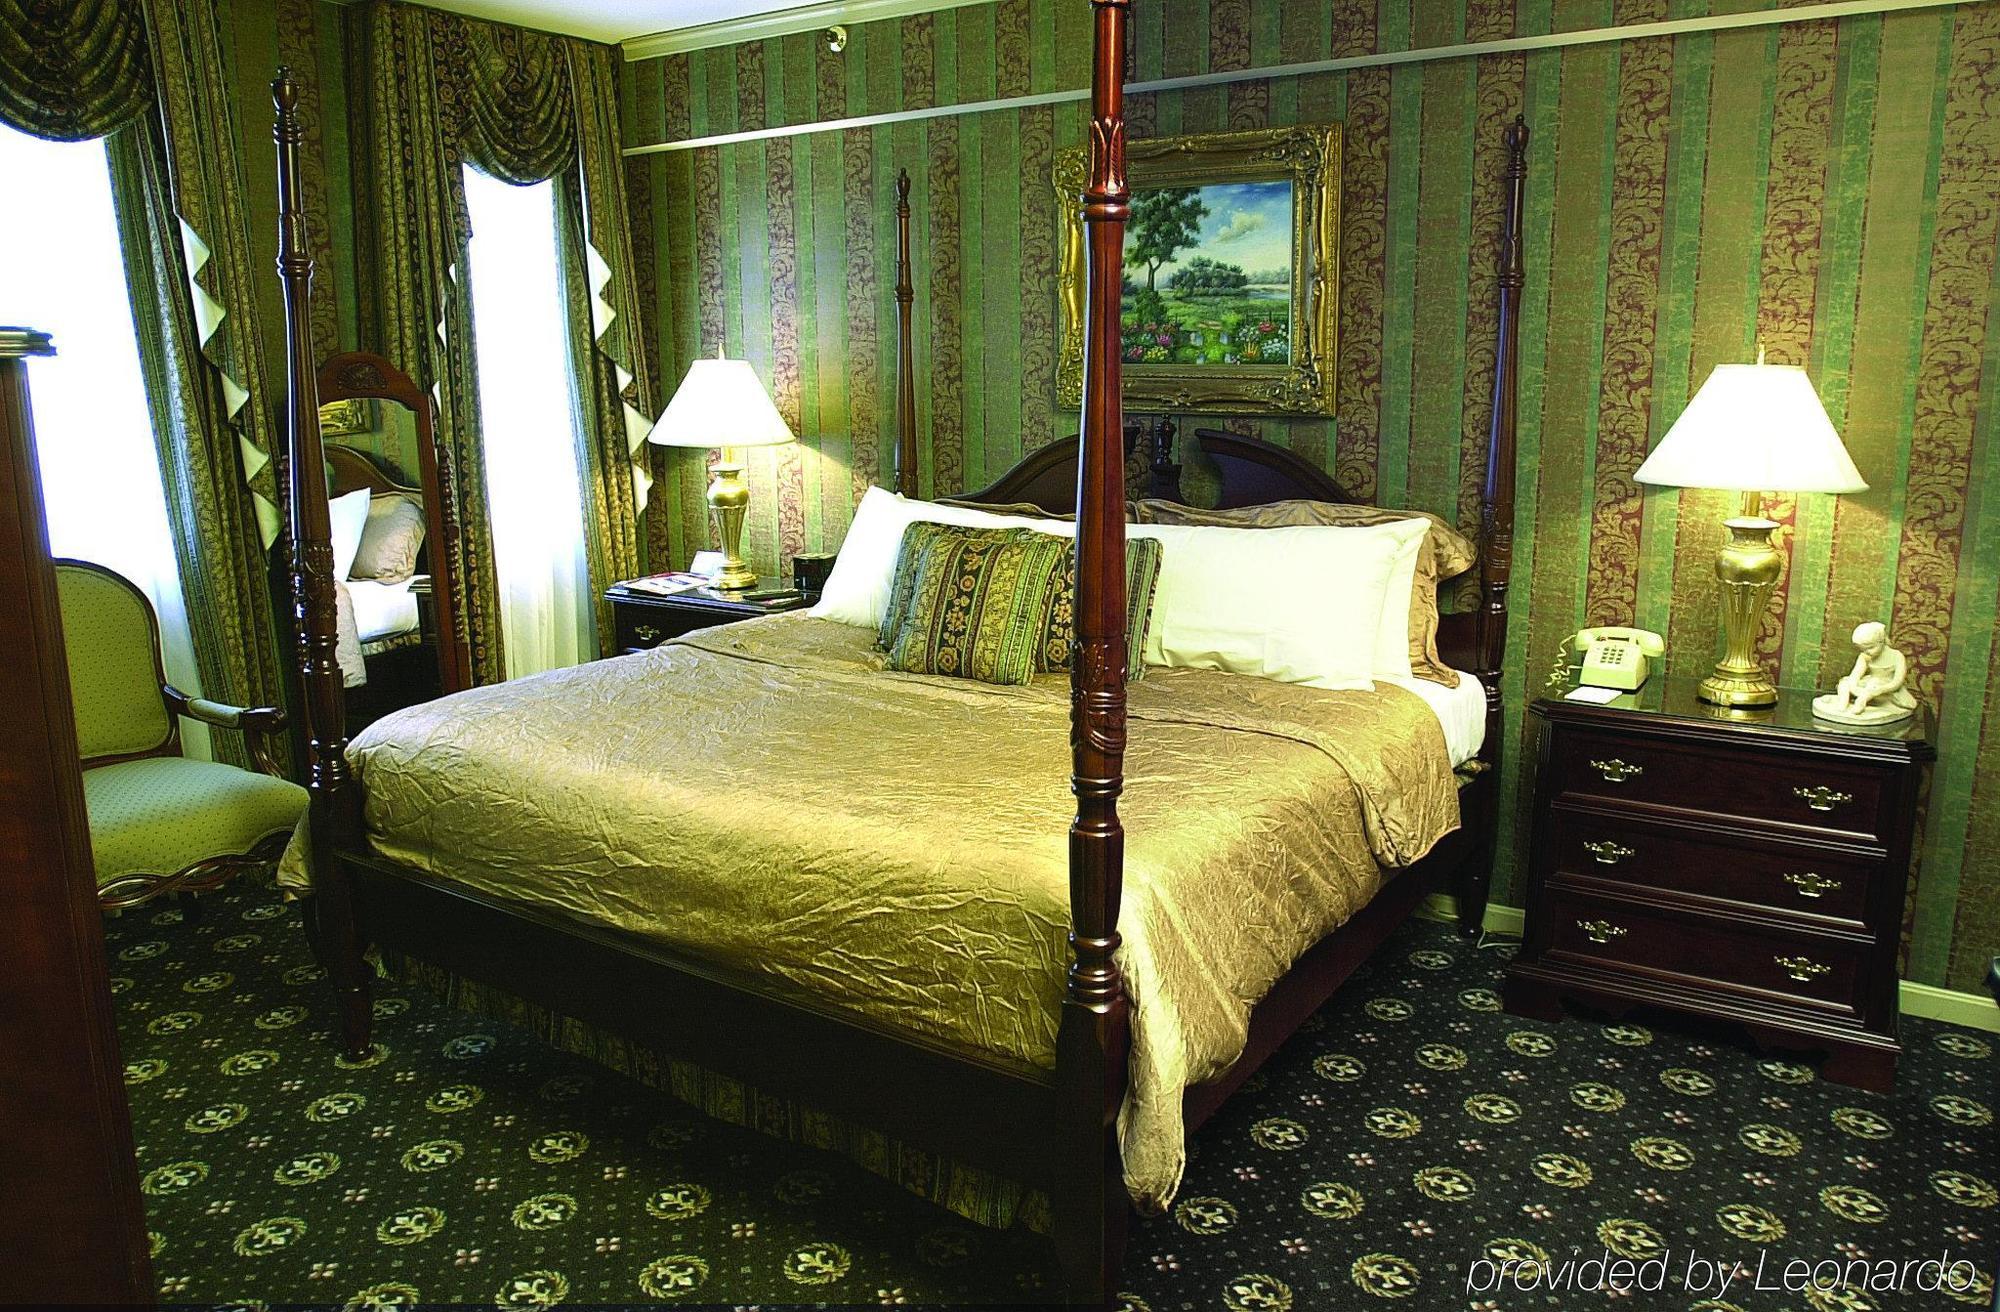 The Brown Hotel Louisville Room photo